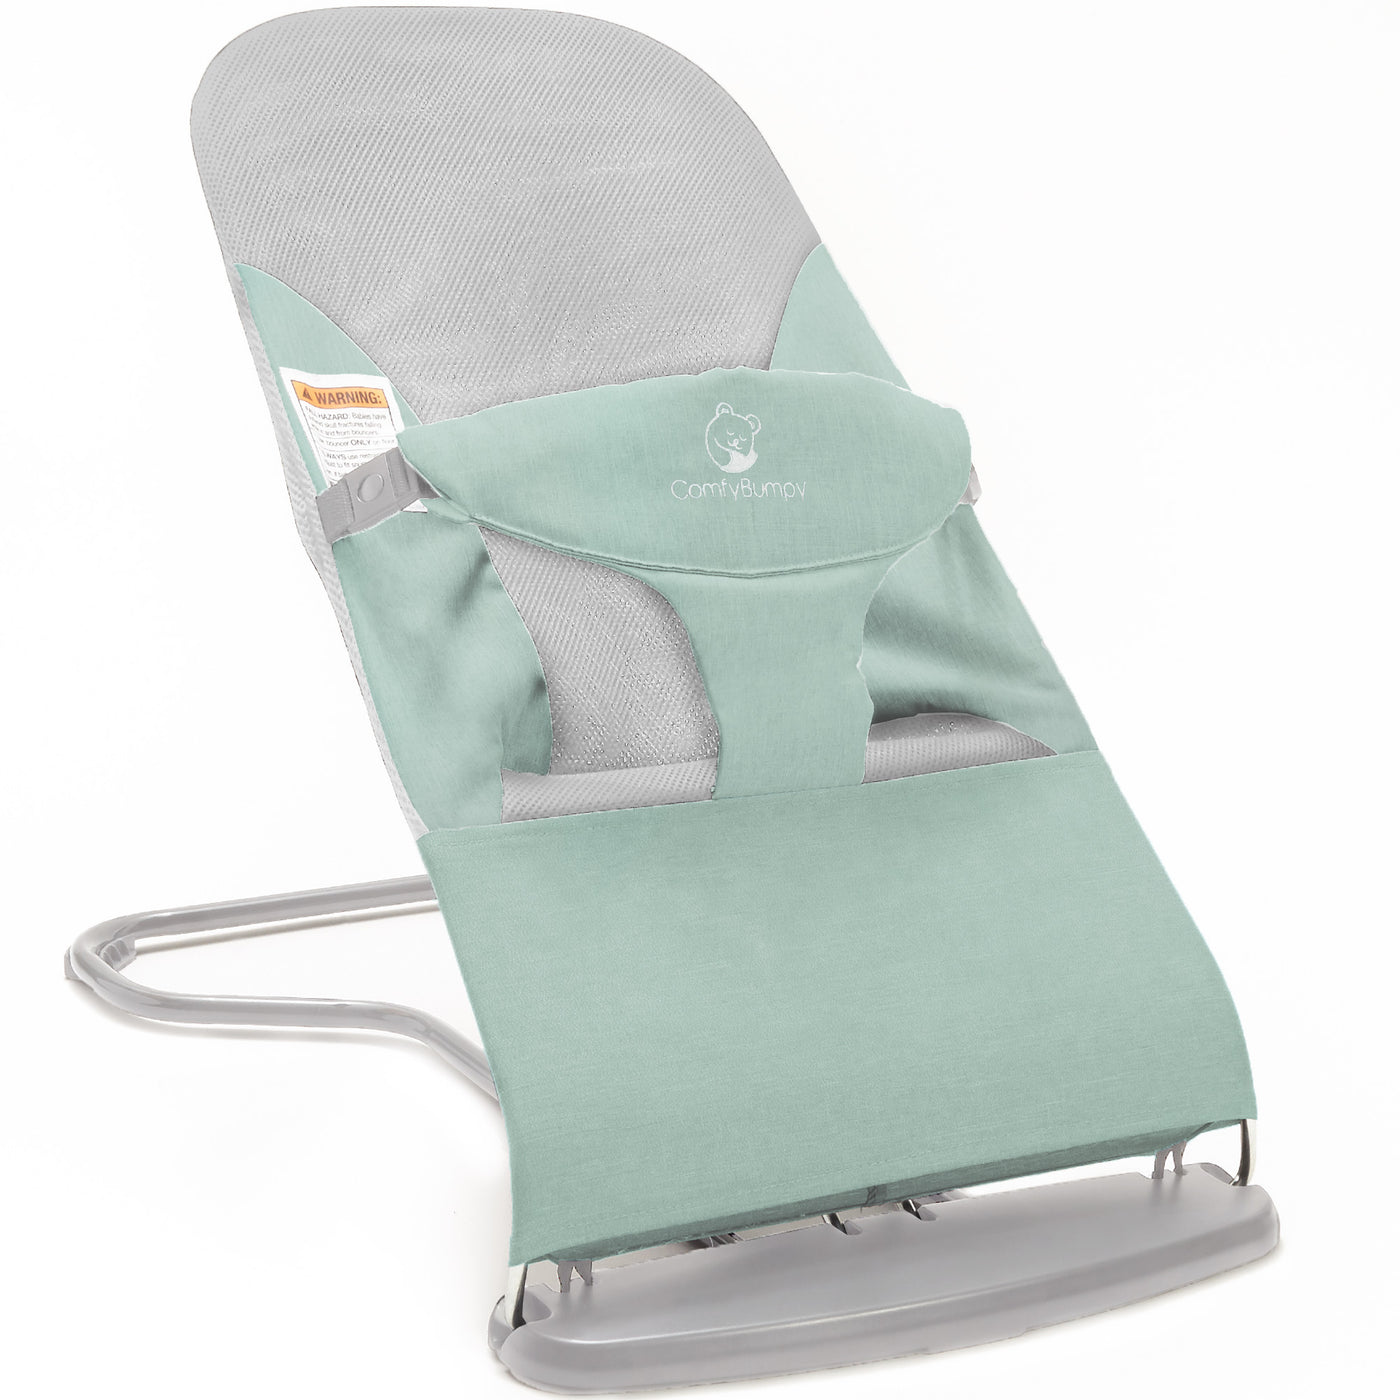 ComfyBumpy Ergonomic Baby Bouncer Seat - Bonus Travel Carry Case Included - Safe, Portable Rocker Chair with Adjustable Height Positions